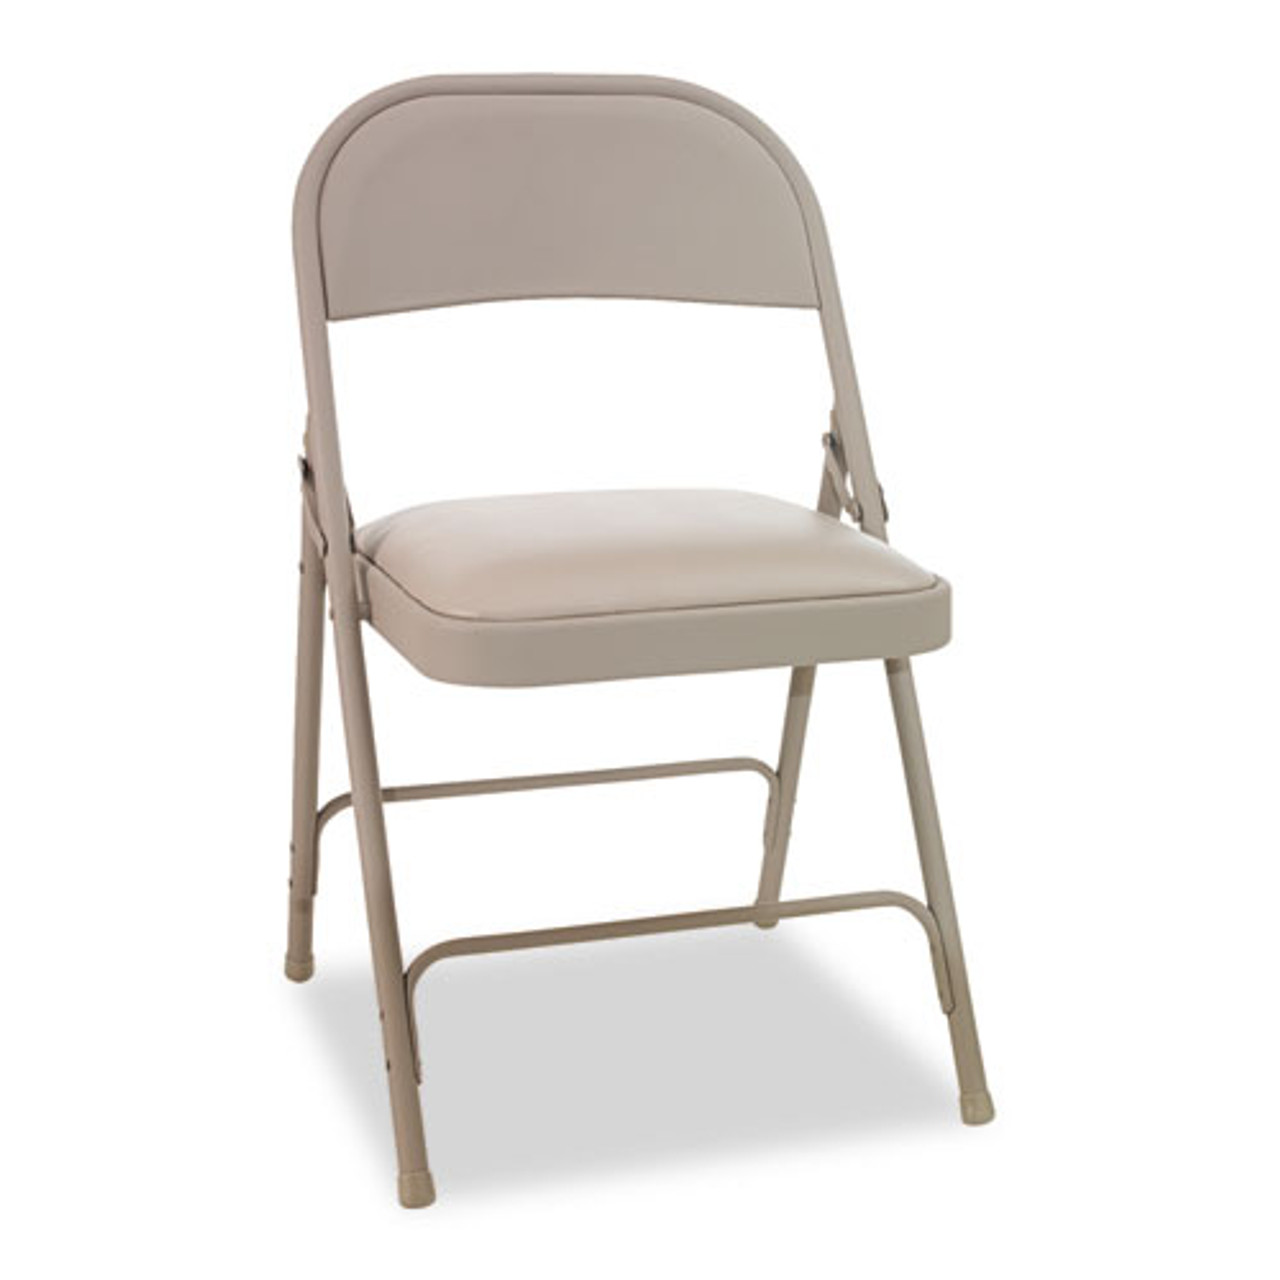 Steel Folding Chair With Two-Brace Support, Padded Seat, Tan, 4/carton, #AL-1242